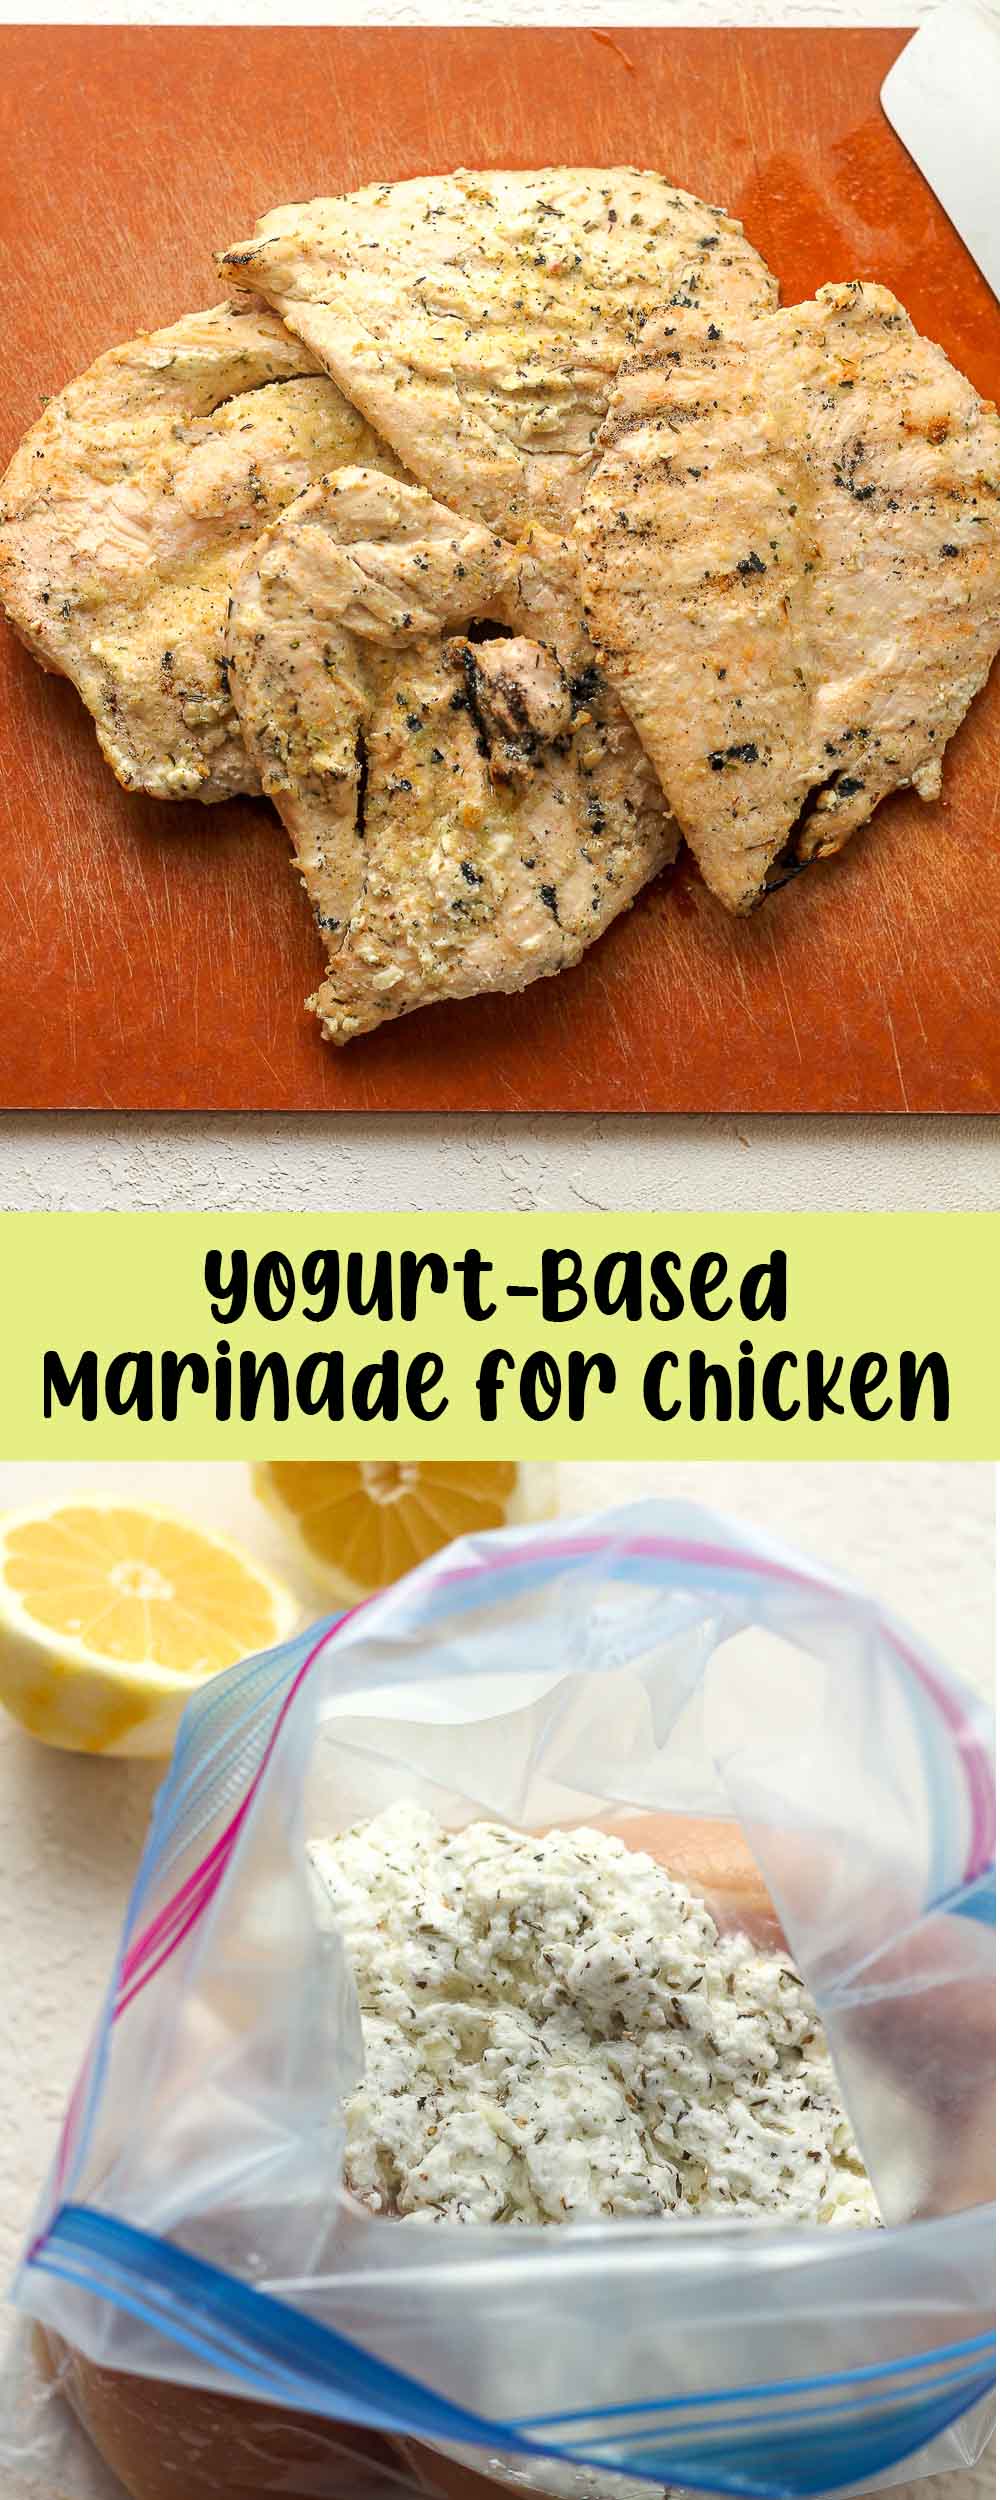 A collage of photos for Yogurt-Based marinade for Chicken